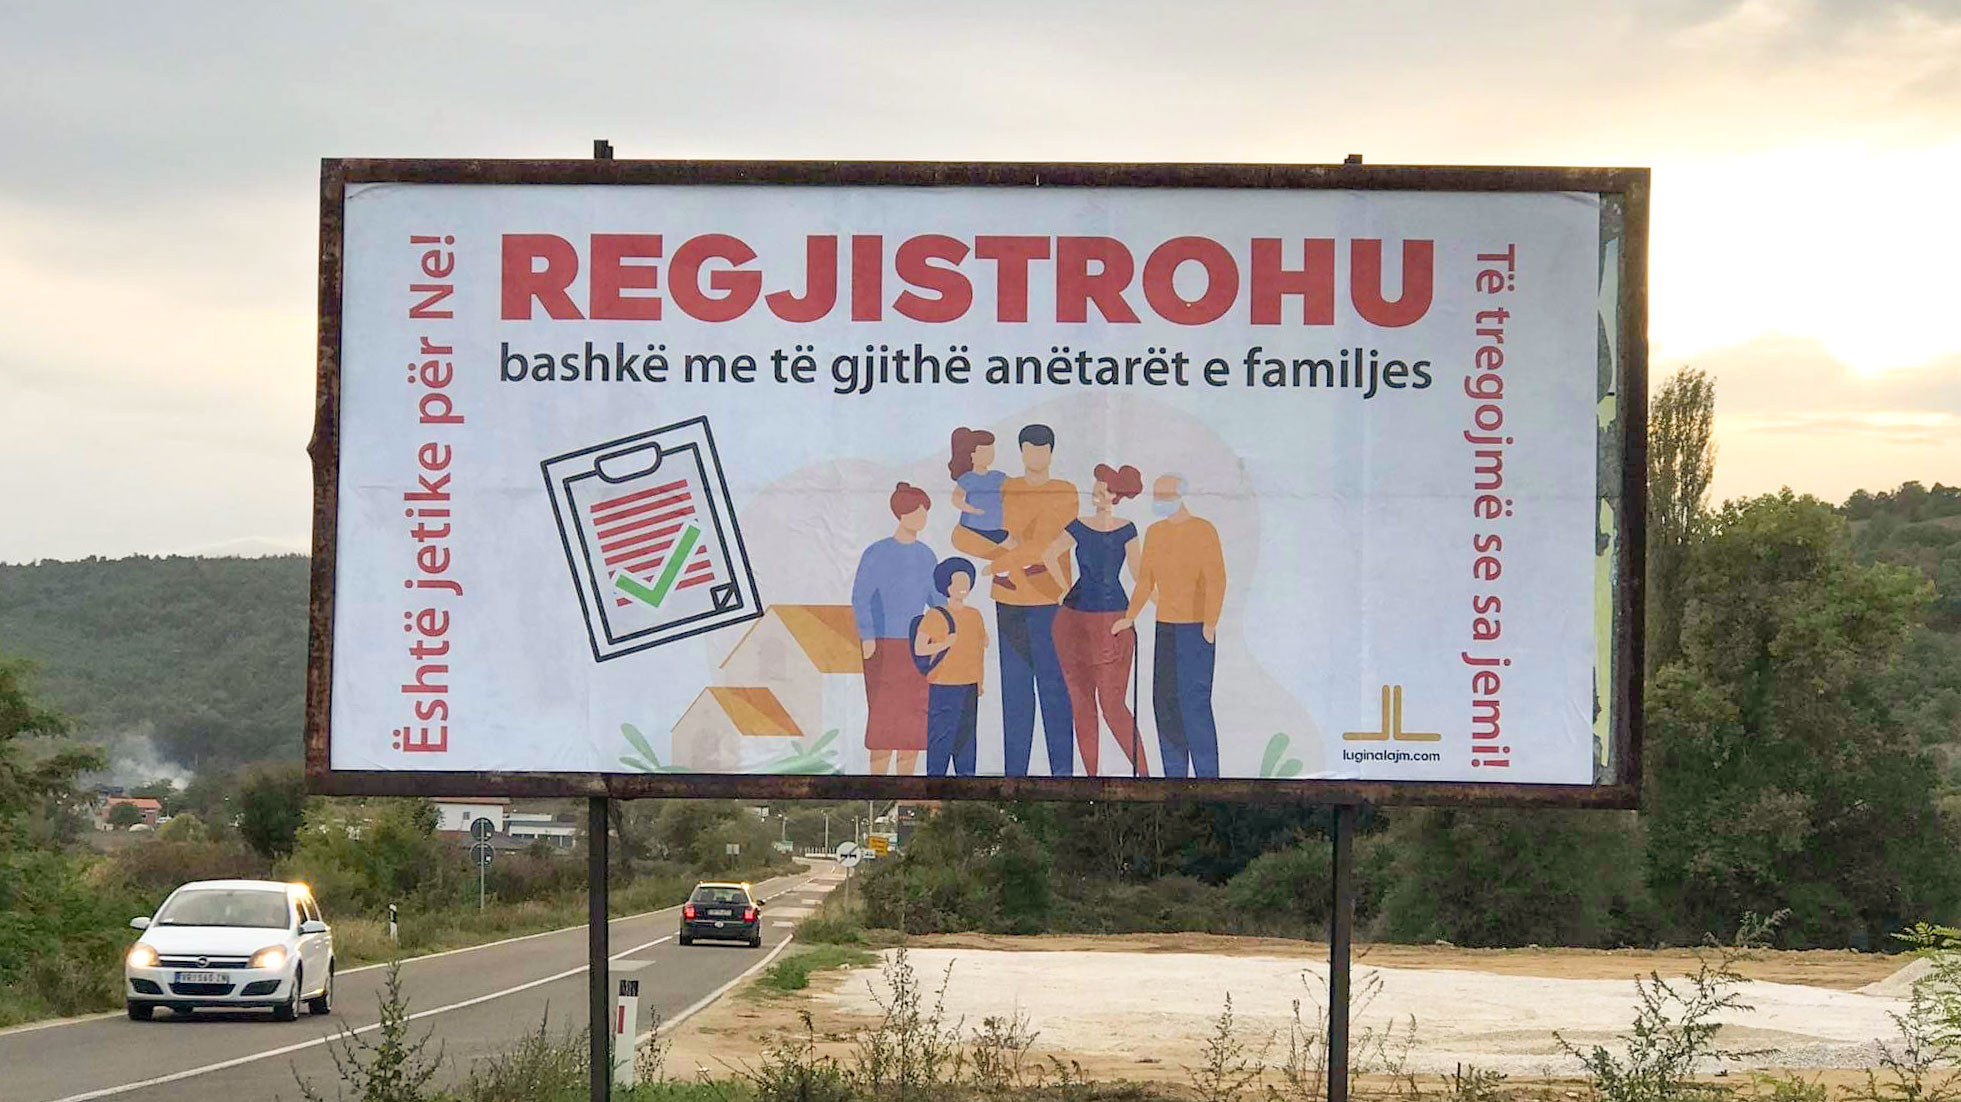 Billboard in village Turija, Bujanovac, encouraging people to register together with their families.